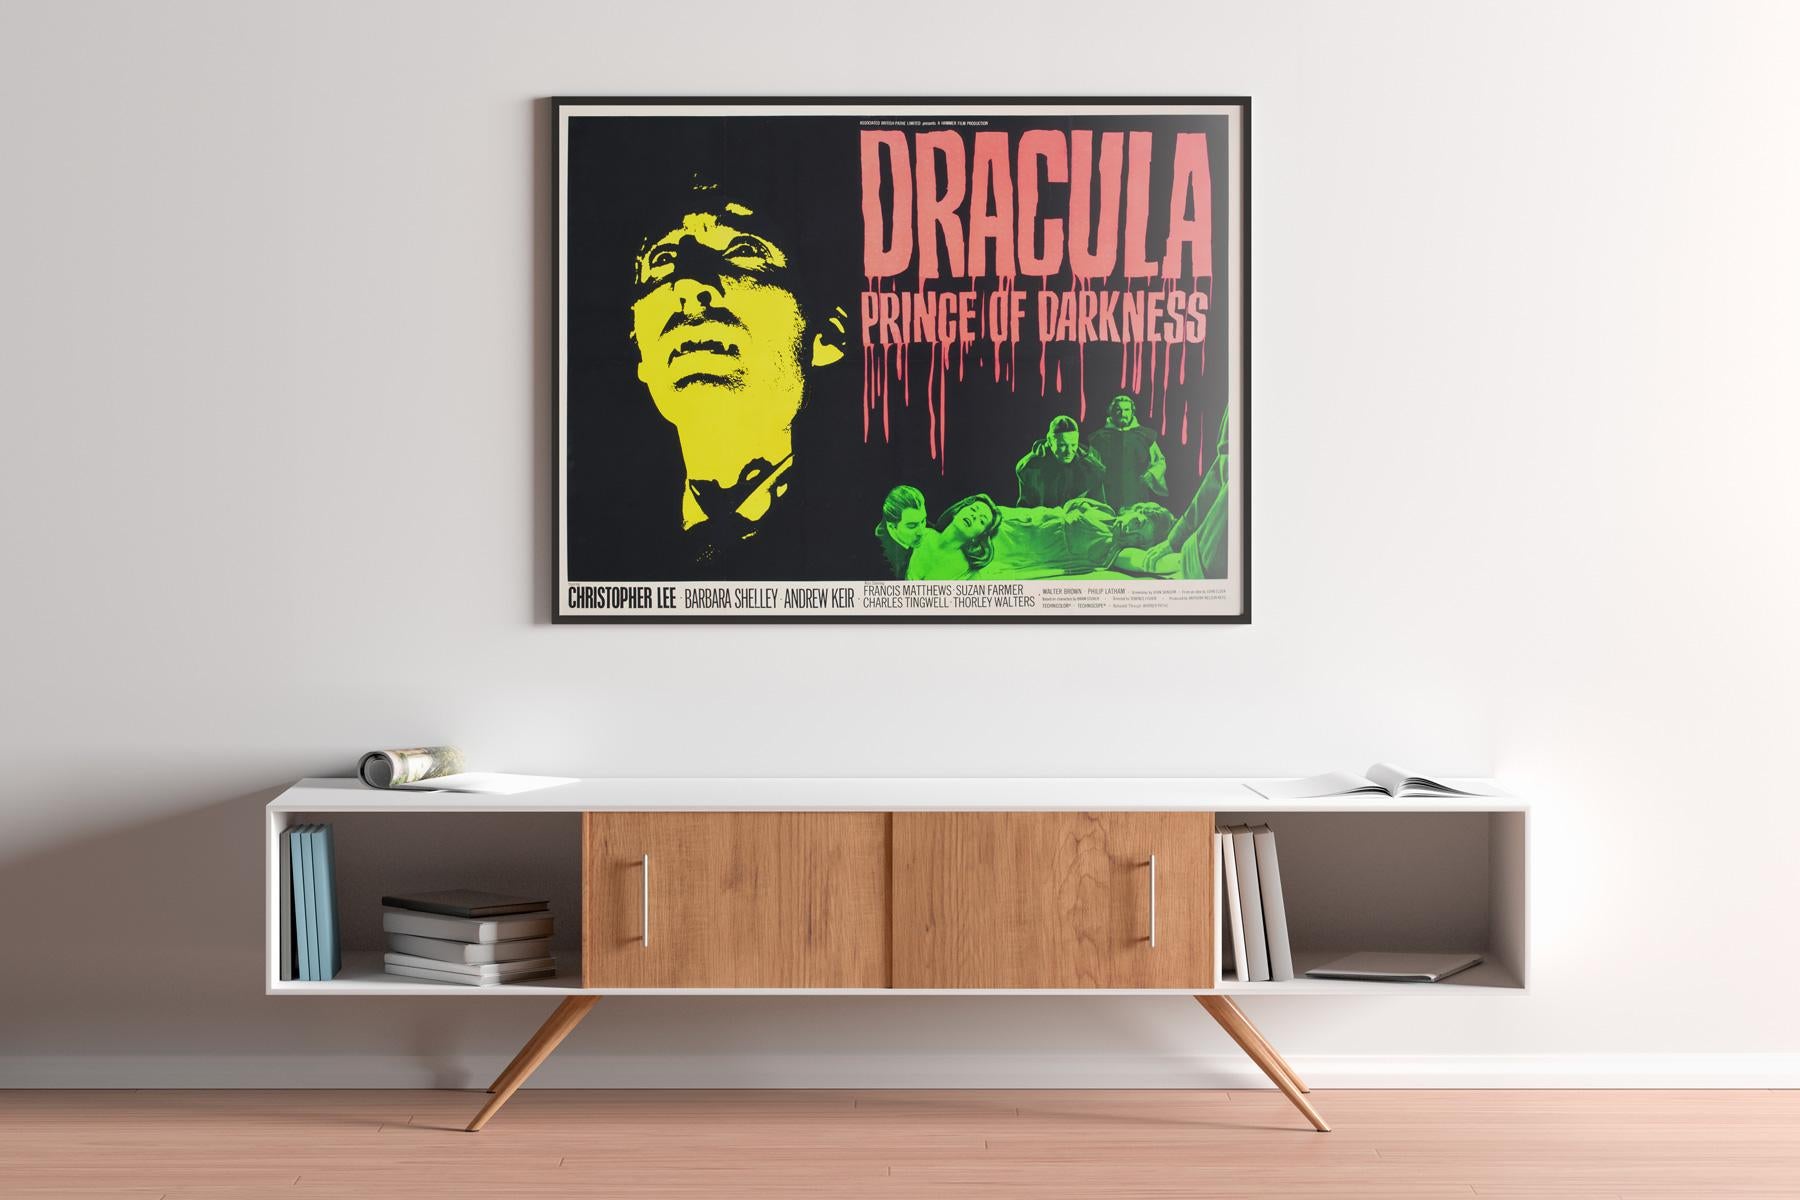 This UK quad film poster for Dracula: Prince of Darkness is one of the holy grails for Hammer Horror collectors. Chantrell presents suitably gory imagery with a blood-dripping title and a day-glo 